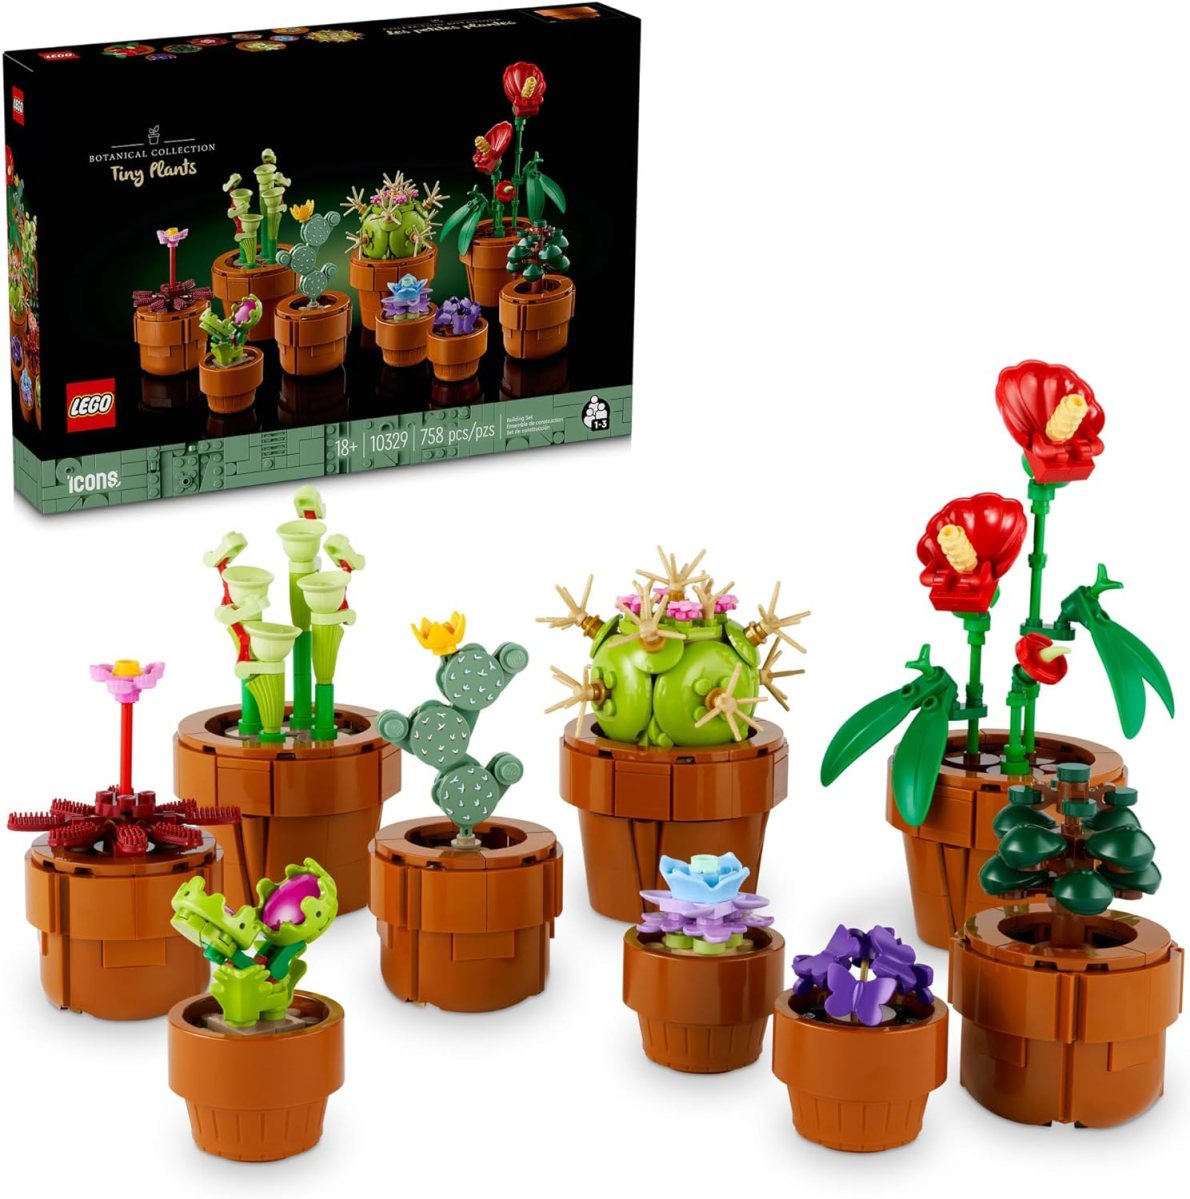 LEGO Icons Tiny Plants set, including a selection of plants in their own pots